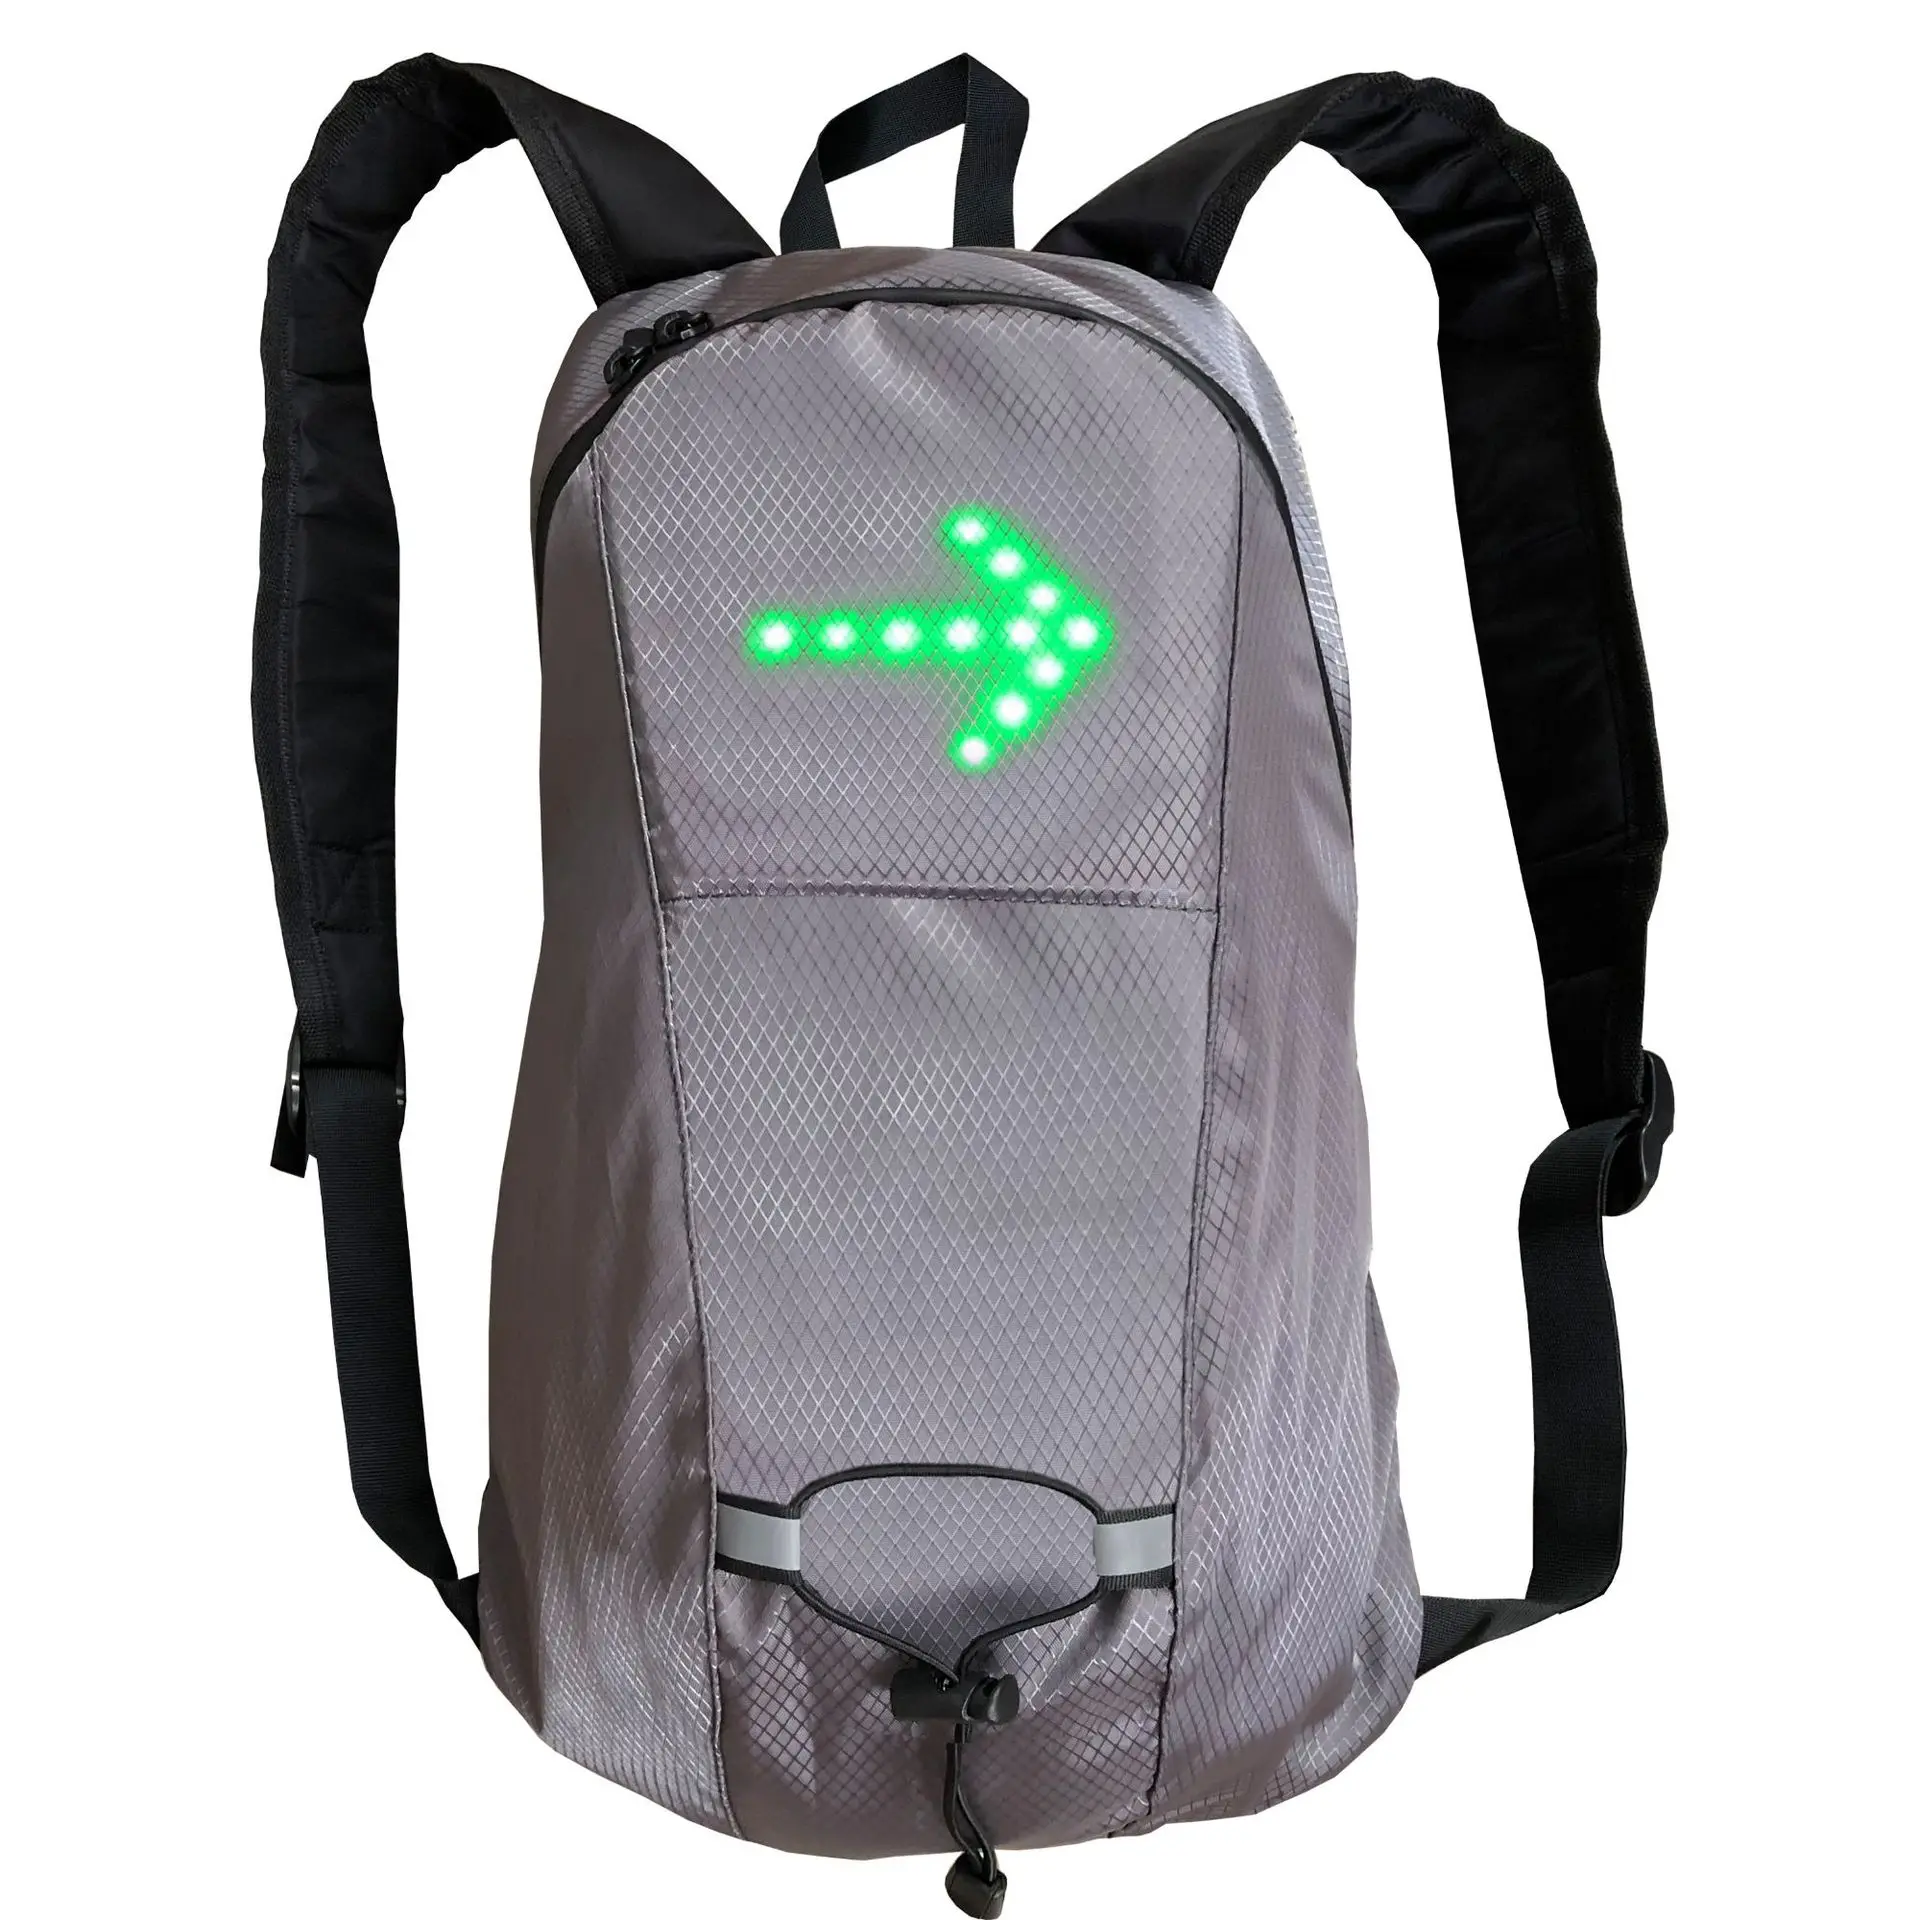 Outdoor Sports Remote Control LED Warning Cycling Running Hiking Trekking Backpack Bag For Toursim Camping